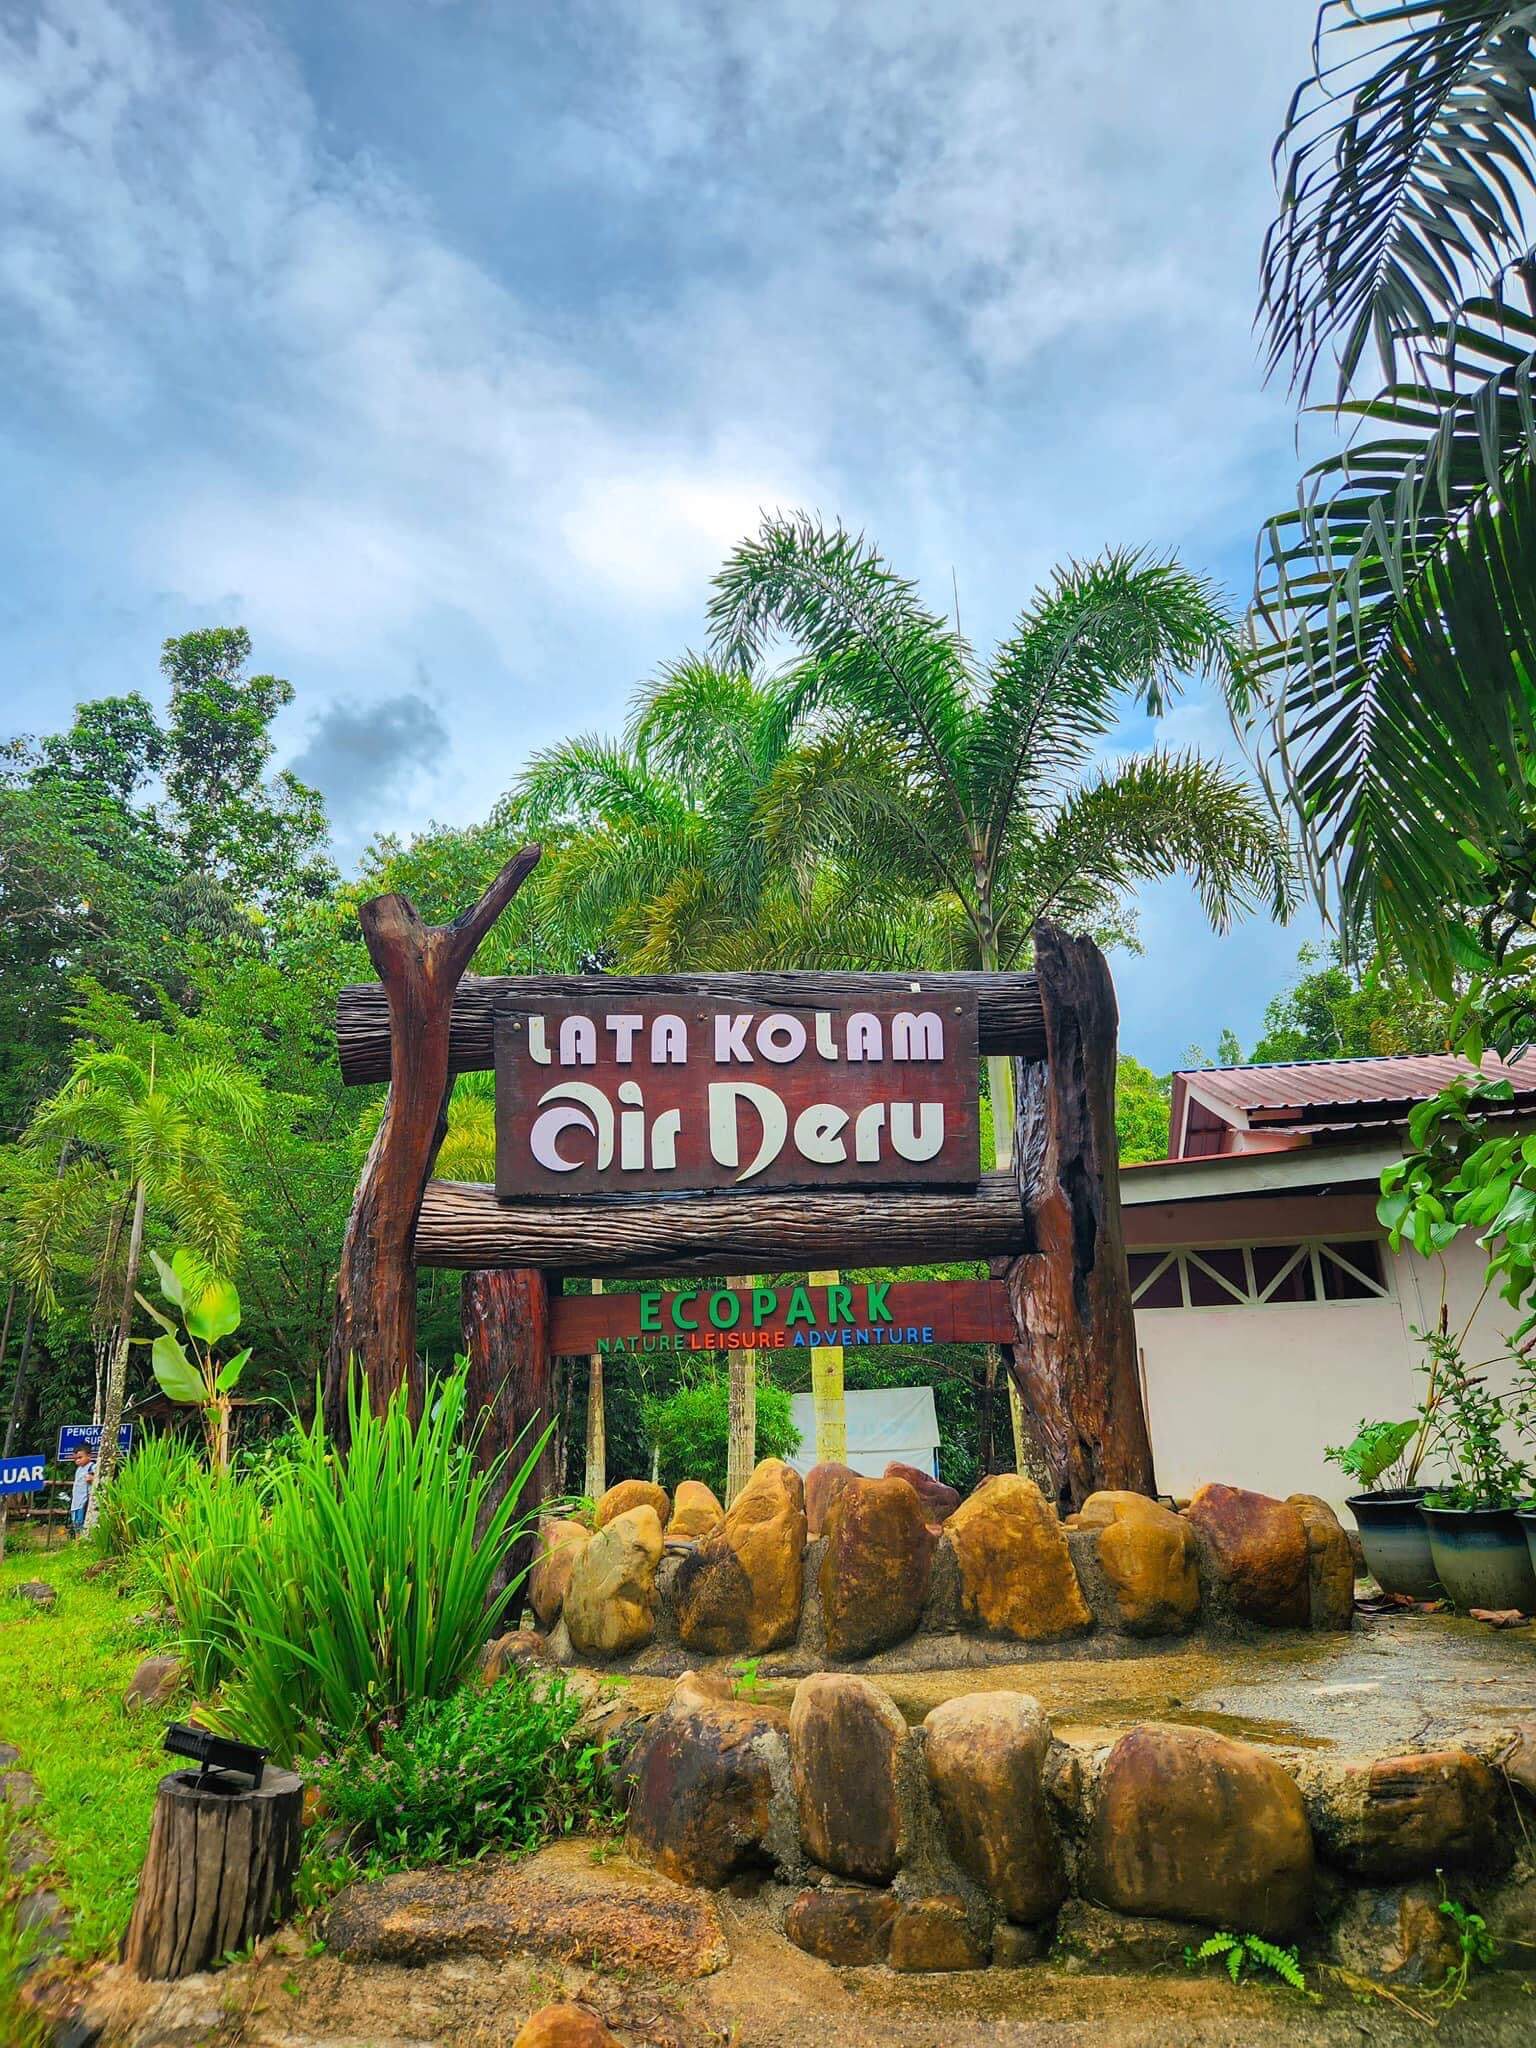 LET'S GO CAMPING at Lata Kolam Air Deru Ecopark!!!

There are 3 levels here! You can explore at your own pace - no need for hiking.
Level 1: Pengkalan Suri - Entrance area
Level 2: Pengkalan Dua - Camper's favourite area
Level 3: Pengkalan Raja - Main waterfall

Campers can choose to camp either at Pengkalan Suri (Level 1) or Pengkalan Dua. Tapak is based on first come first served basis.